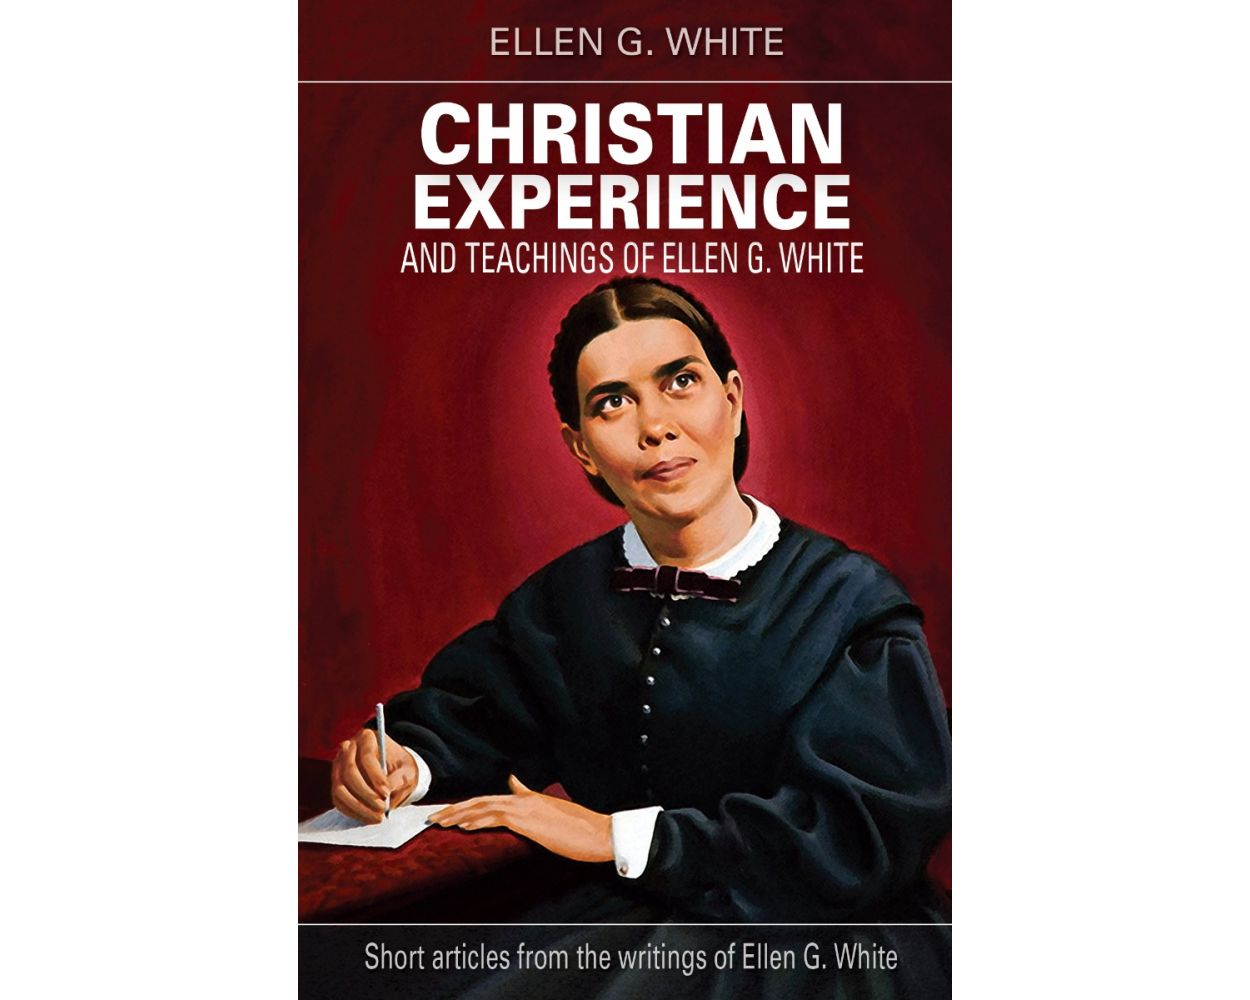 Christian　of　G.　Teachings　Experience　Ellen　And　White